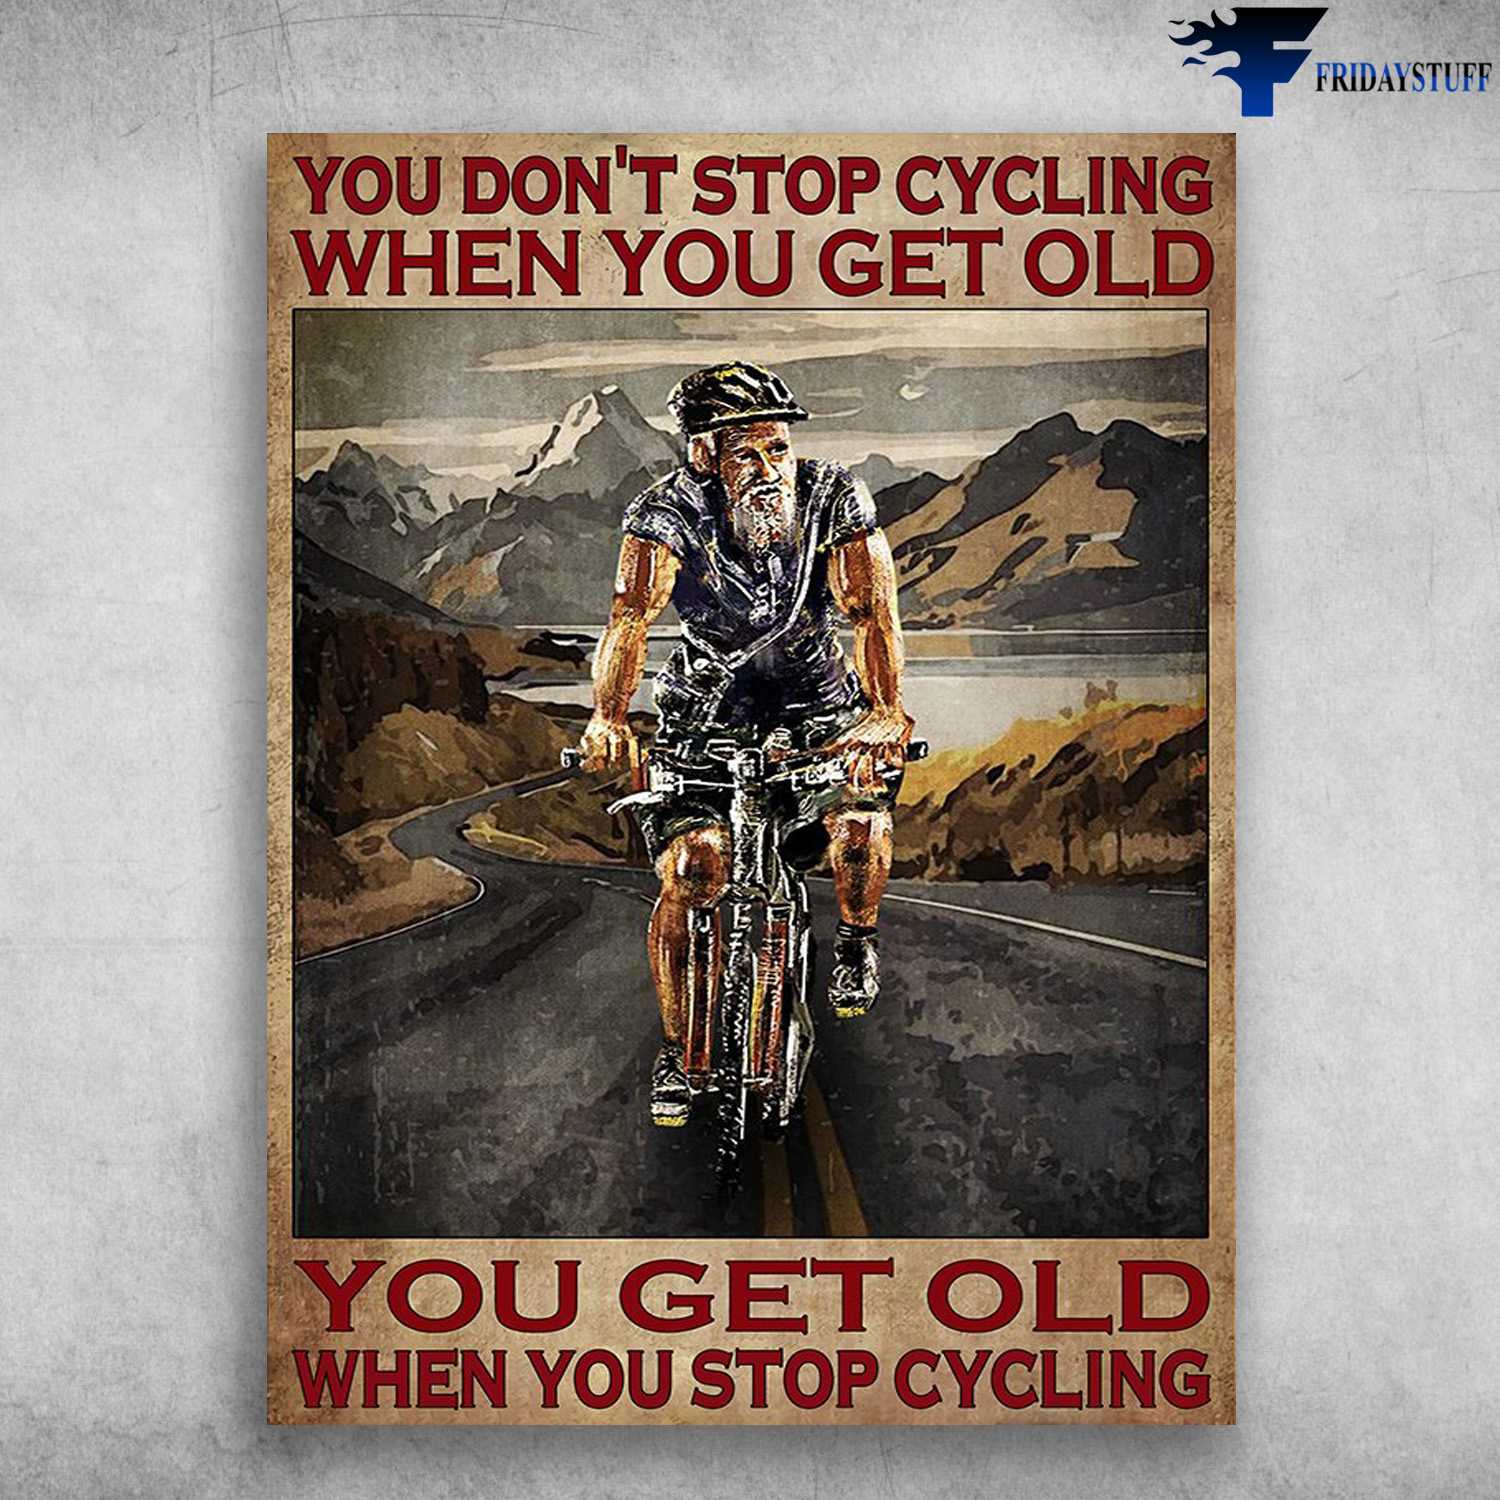 Old Man Cycling, Biker Poster - You Don't Stop Cycling When You Get Old, You Get Old When You Stop Cycling